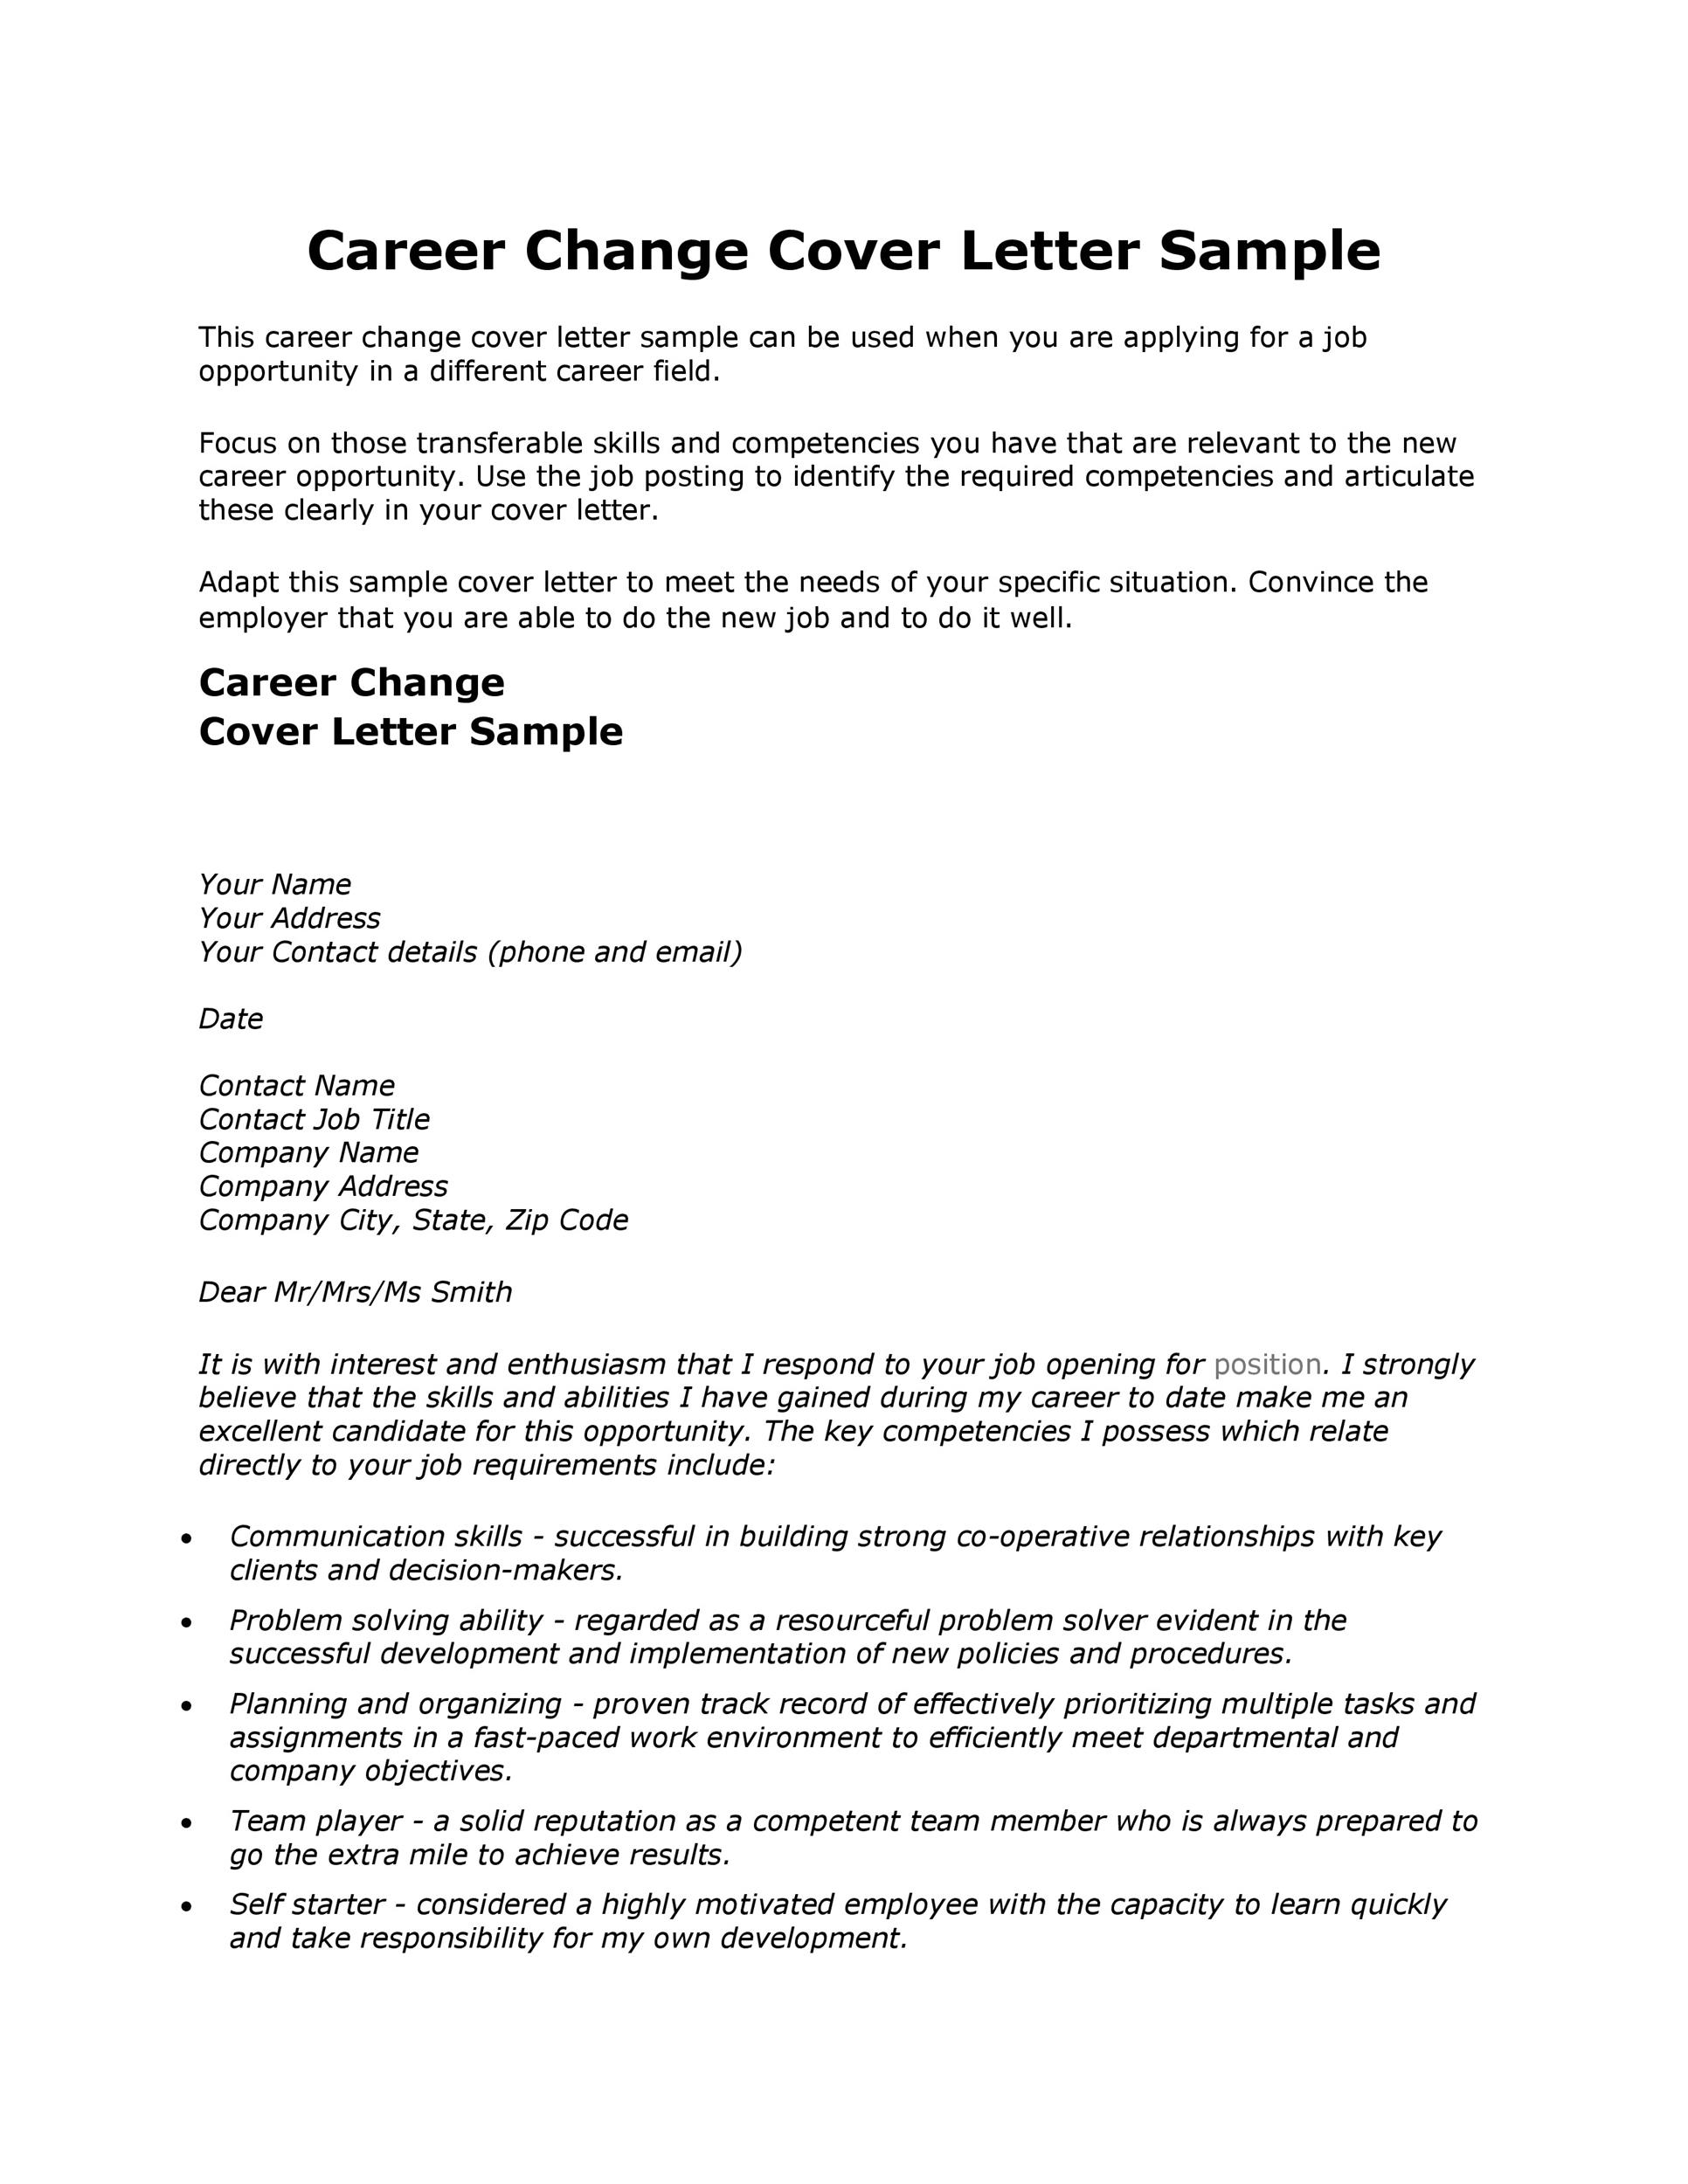 39 Professional Career Change Cover Letters ᐅ TemplateLab